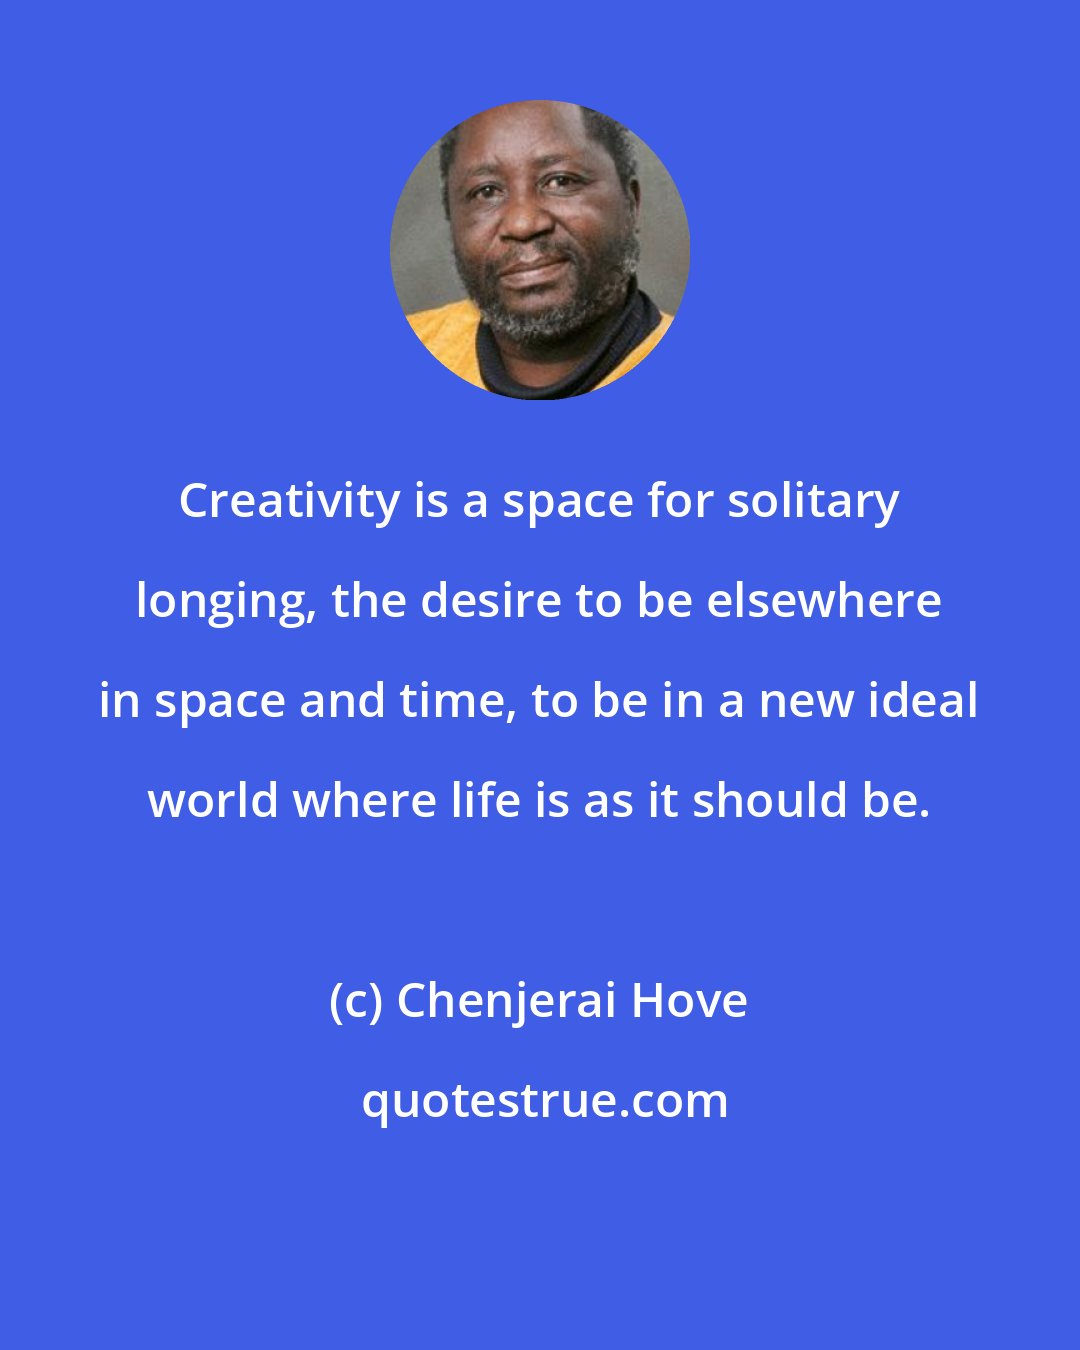 Chenjerai Hove: Creativity is a space for solitary longing, the desire to be elsewhere in space and time, to be in a new ideal world where life is as it should be.